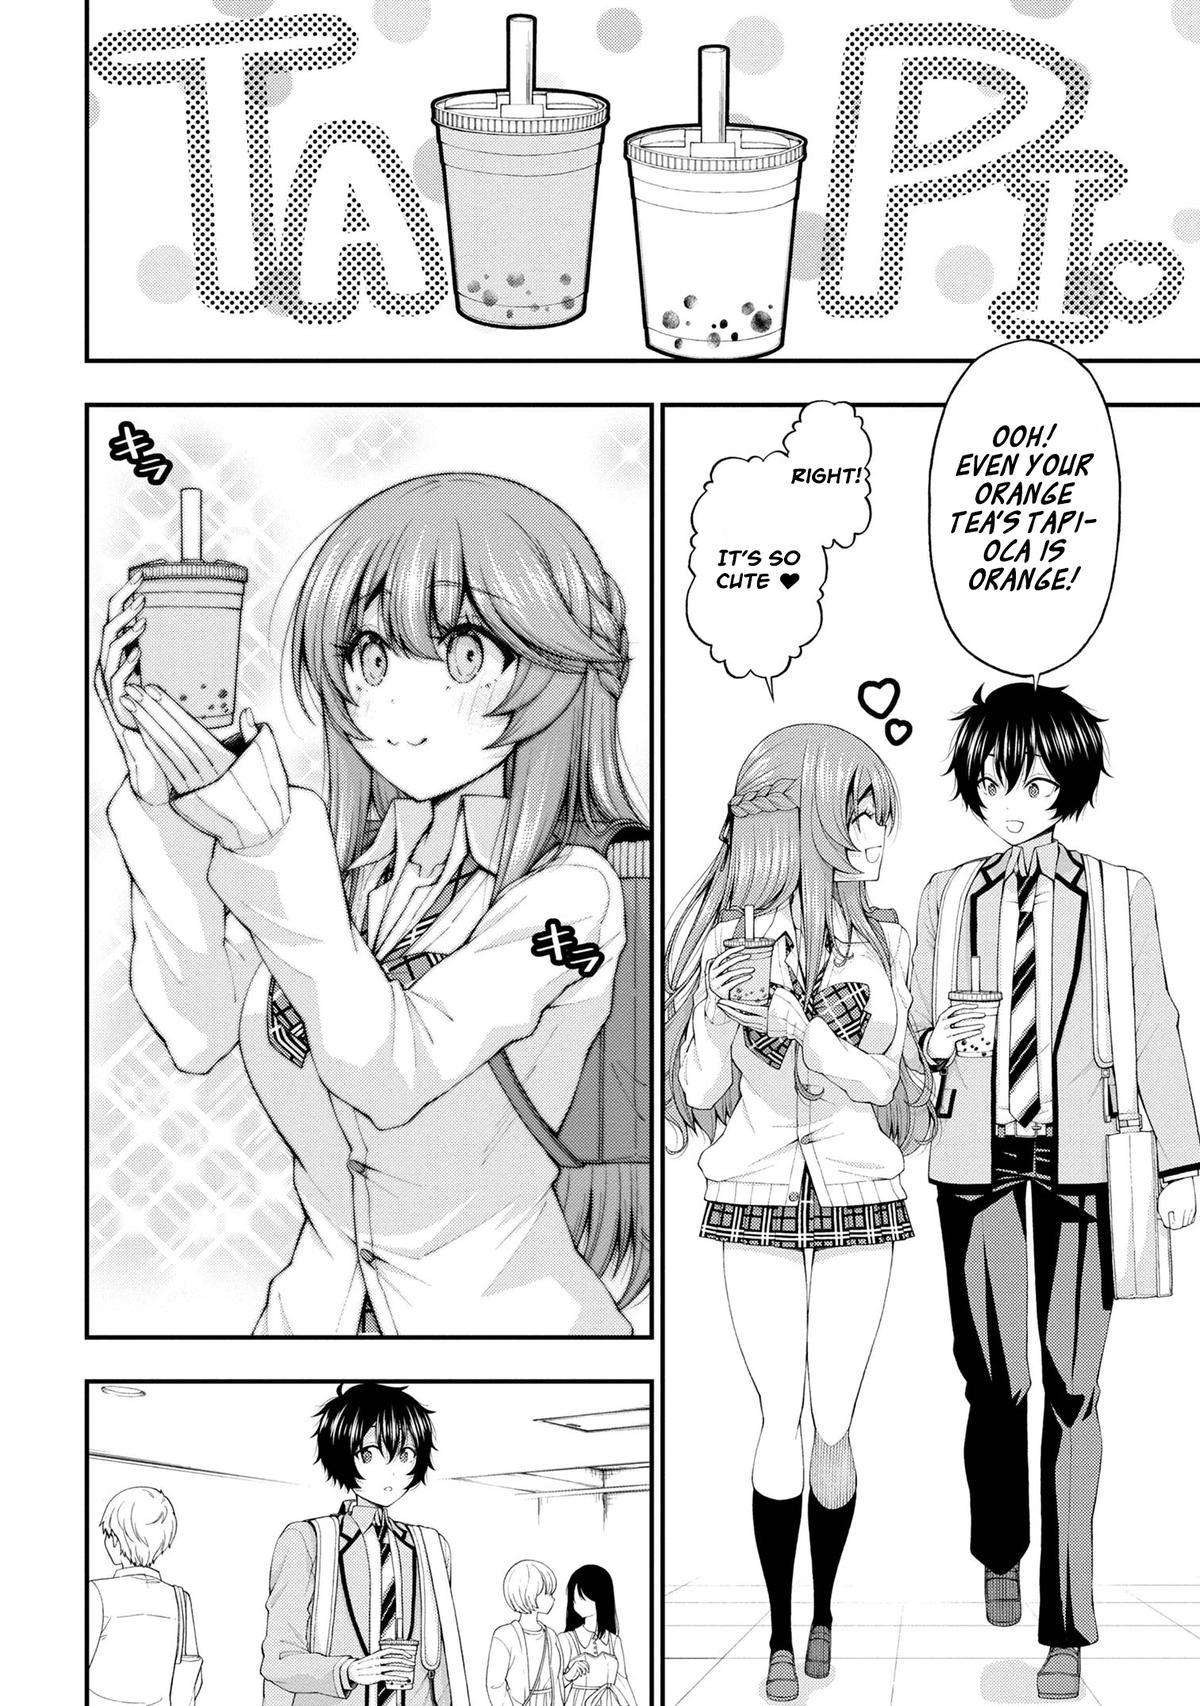 The Gal Who Was Meant to Confess to Me as a Game Punishment - chapter 14 - #4